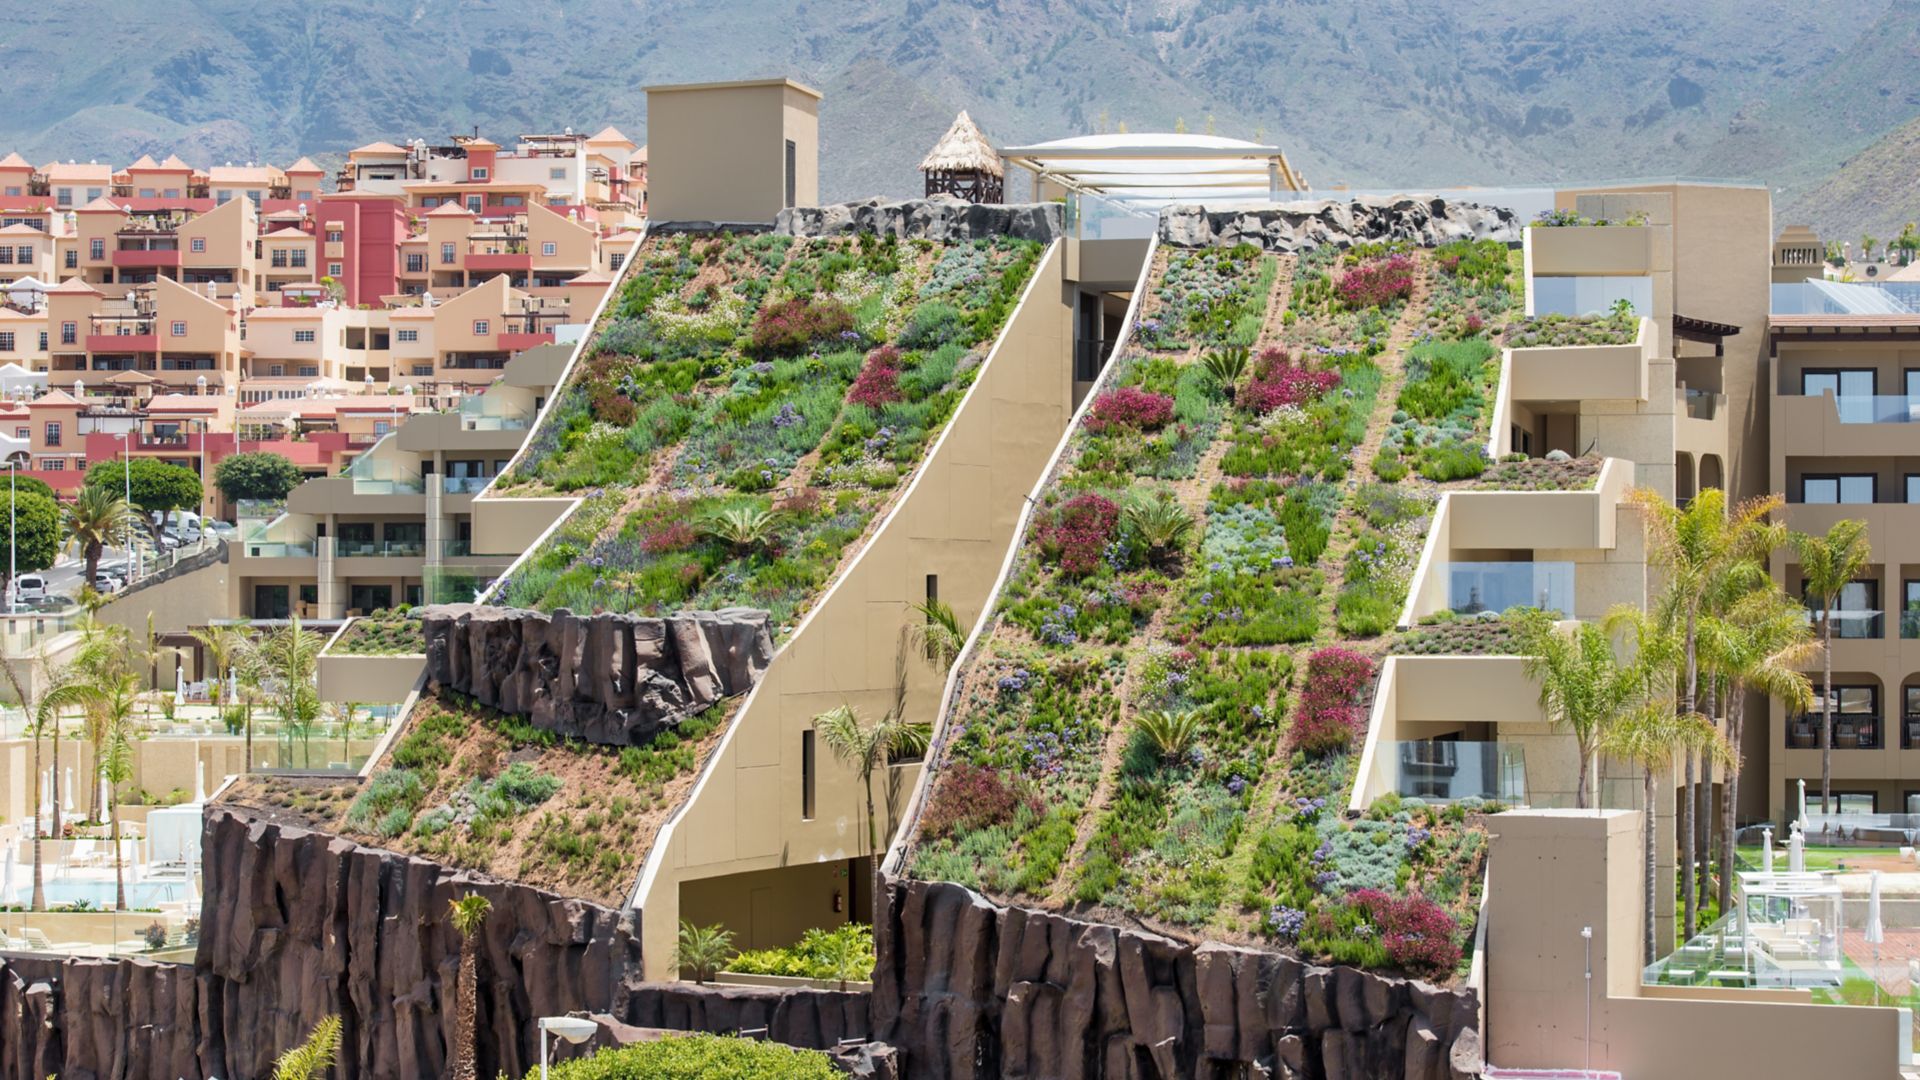 Green roof with single-ply FPO membrane of Sarnafil system installed on GF Victoria Hotel in Tenerife in Spain